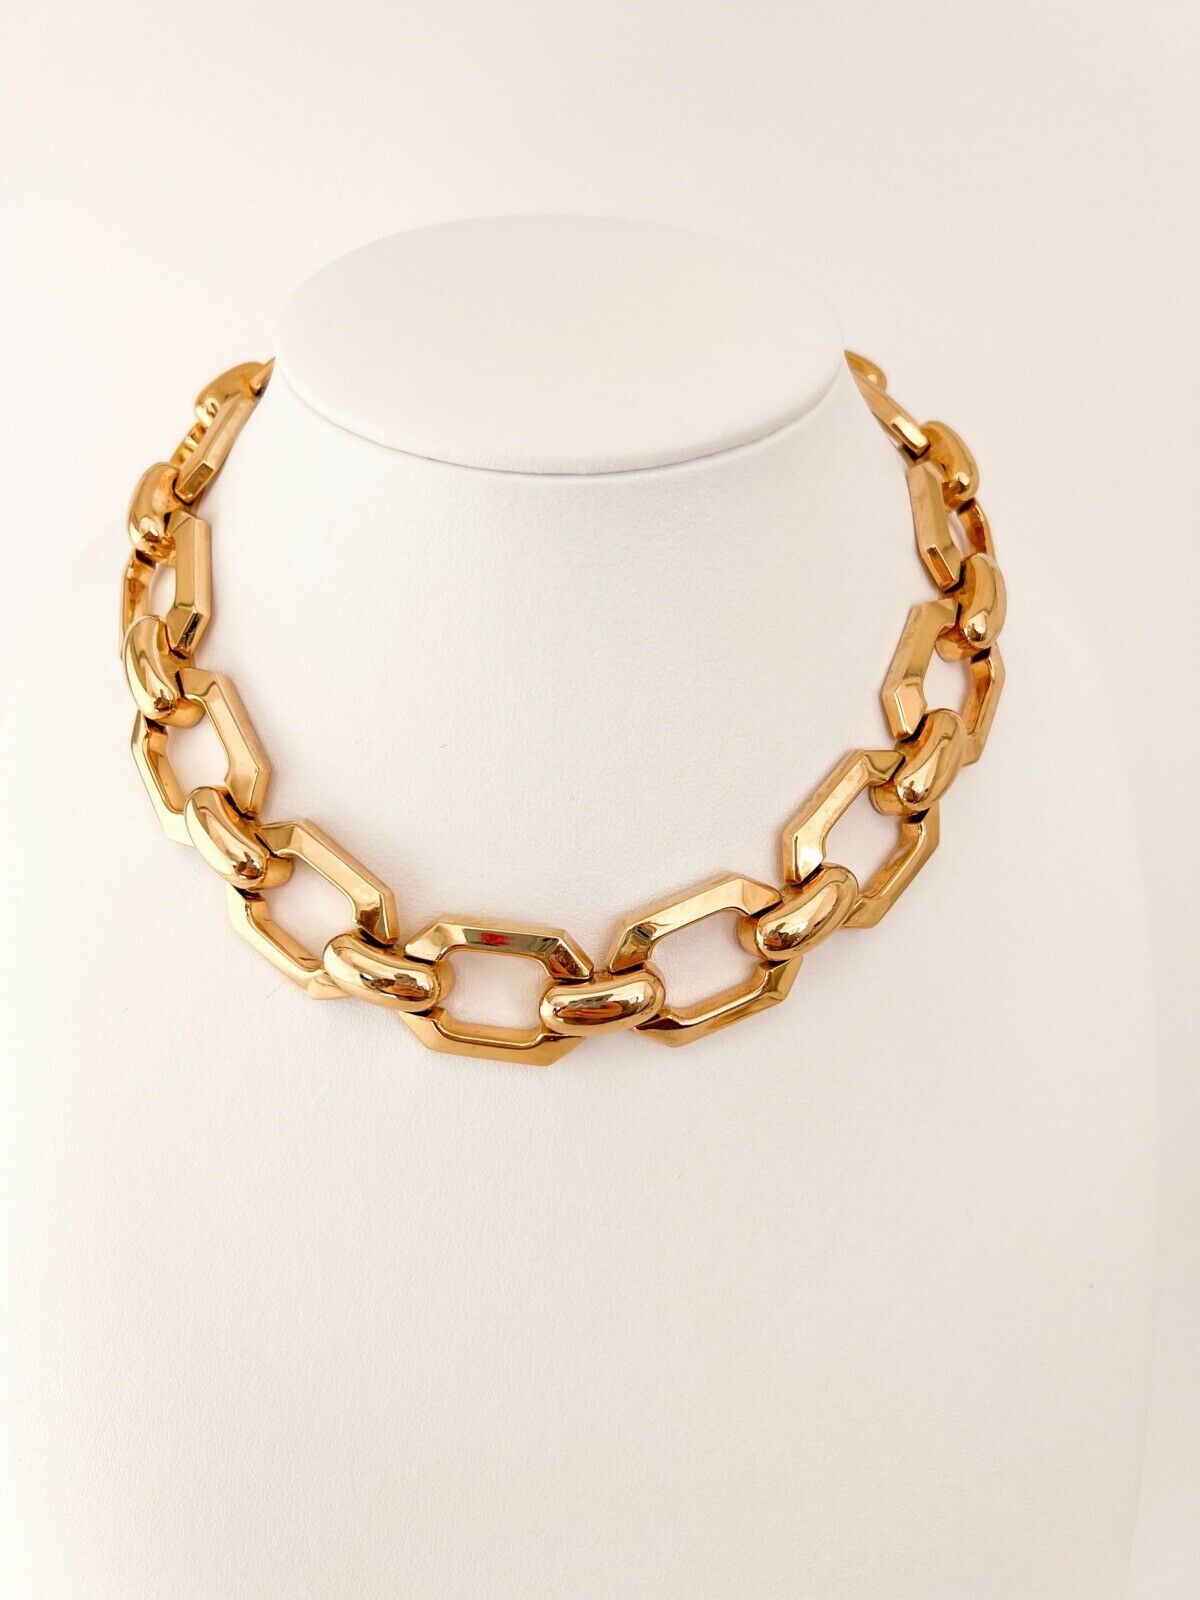 Christian Dior Germany Vintage Chain Necklace Choker 